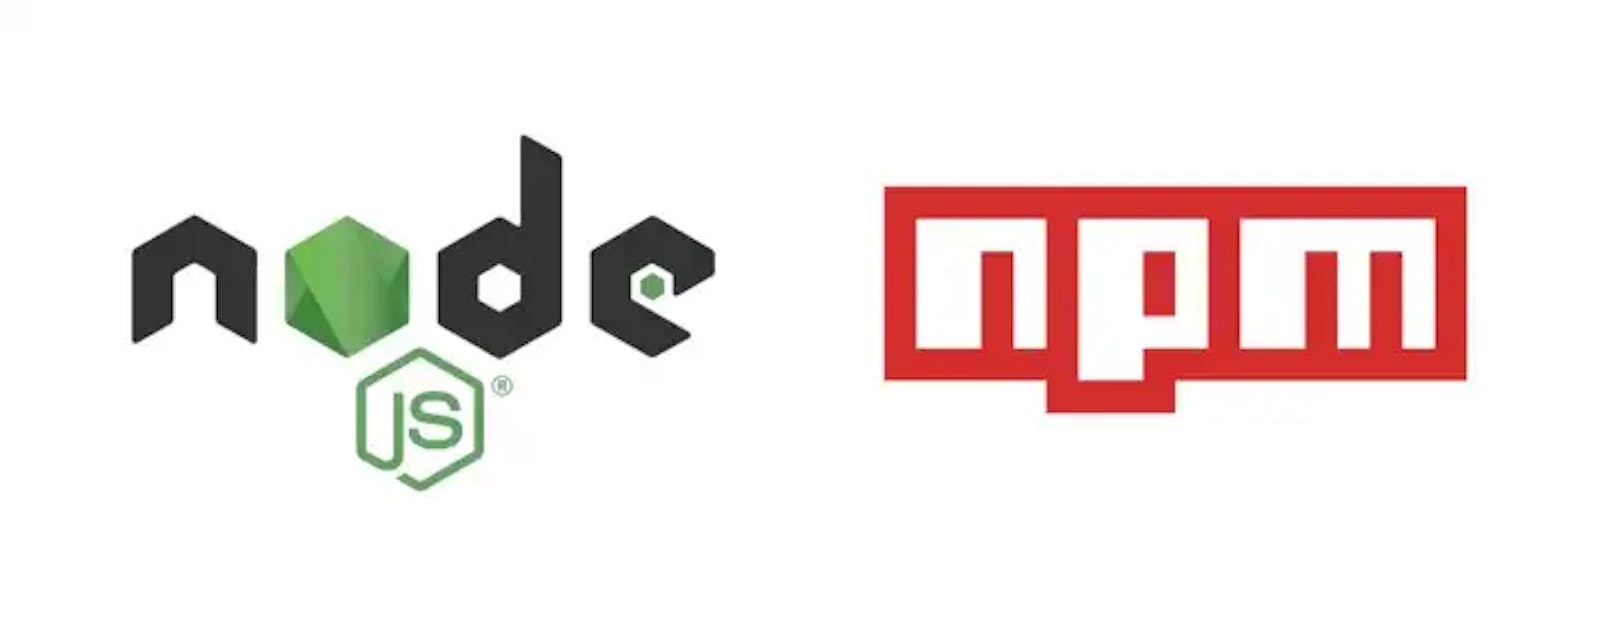 A Guide to npm install: Types, Meanings, and Flags